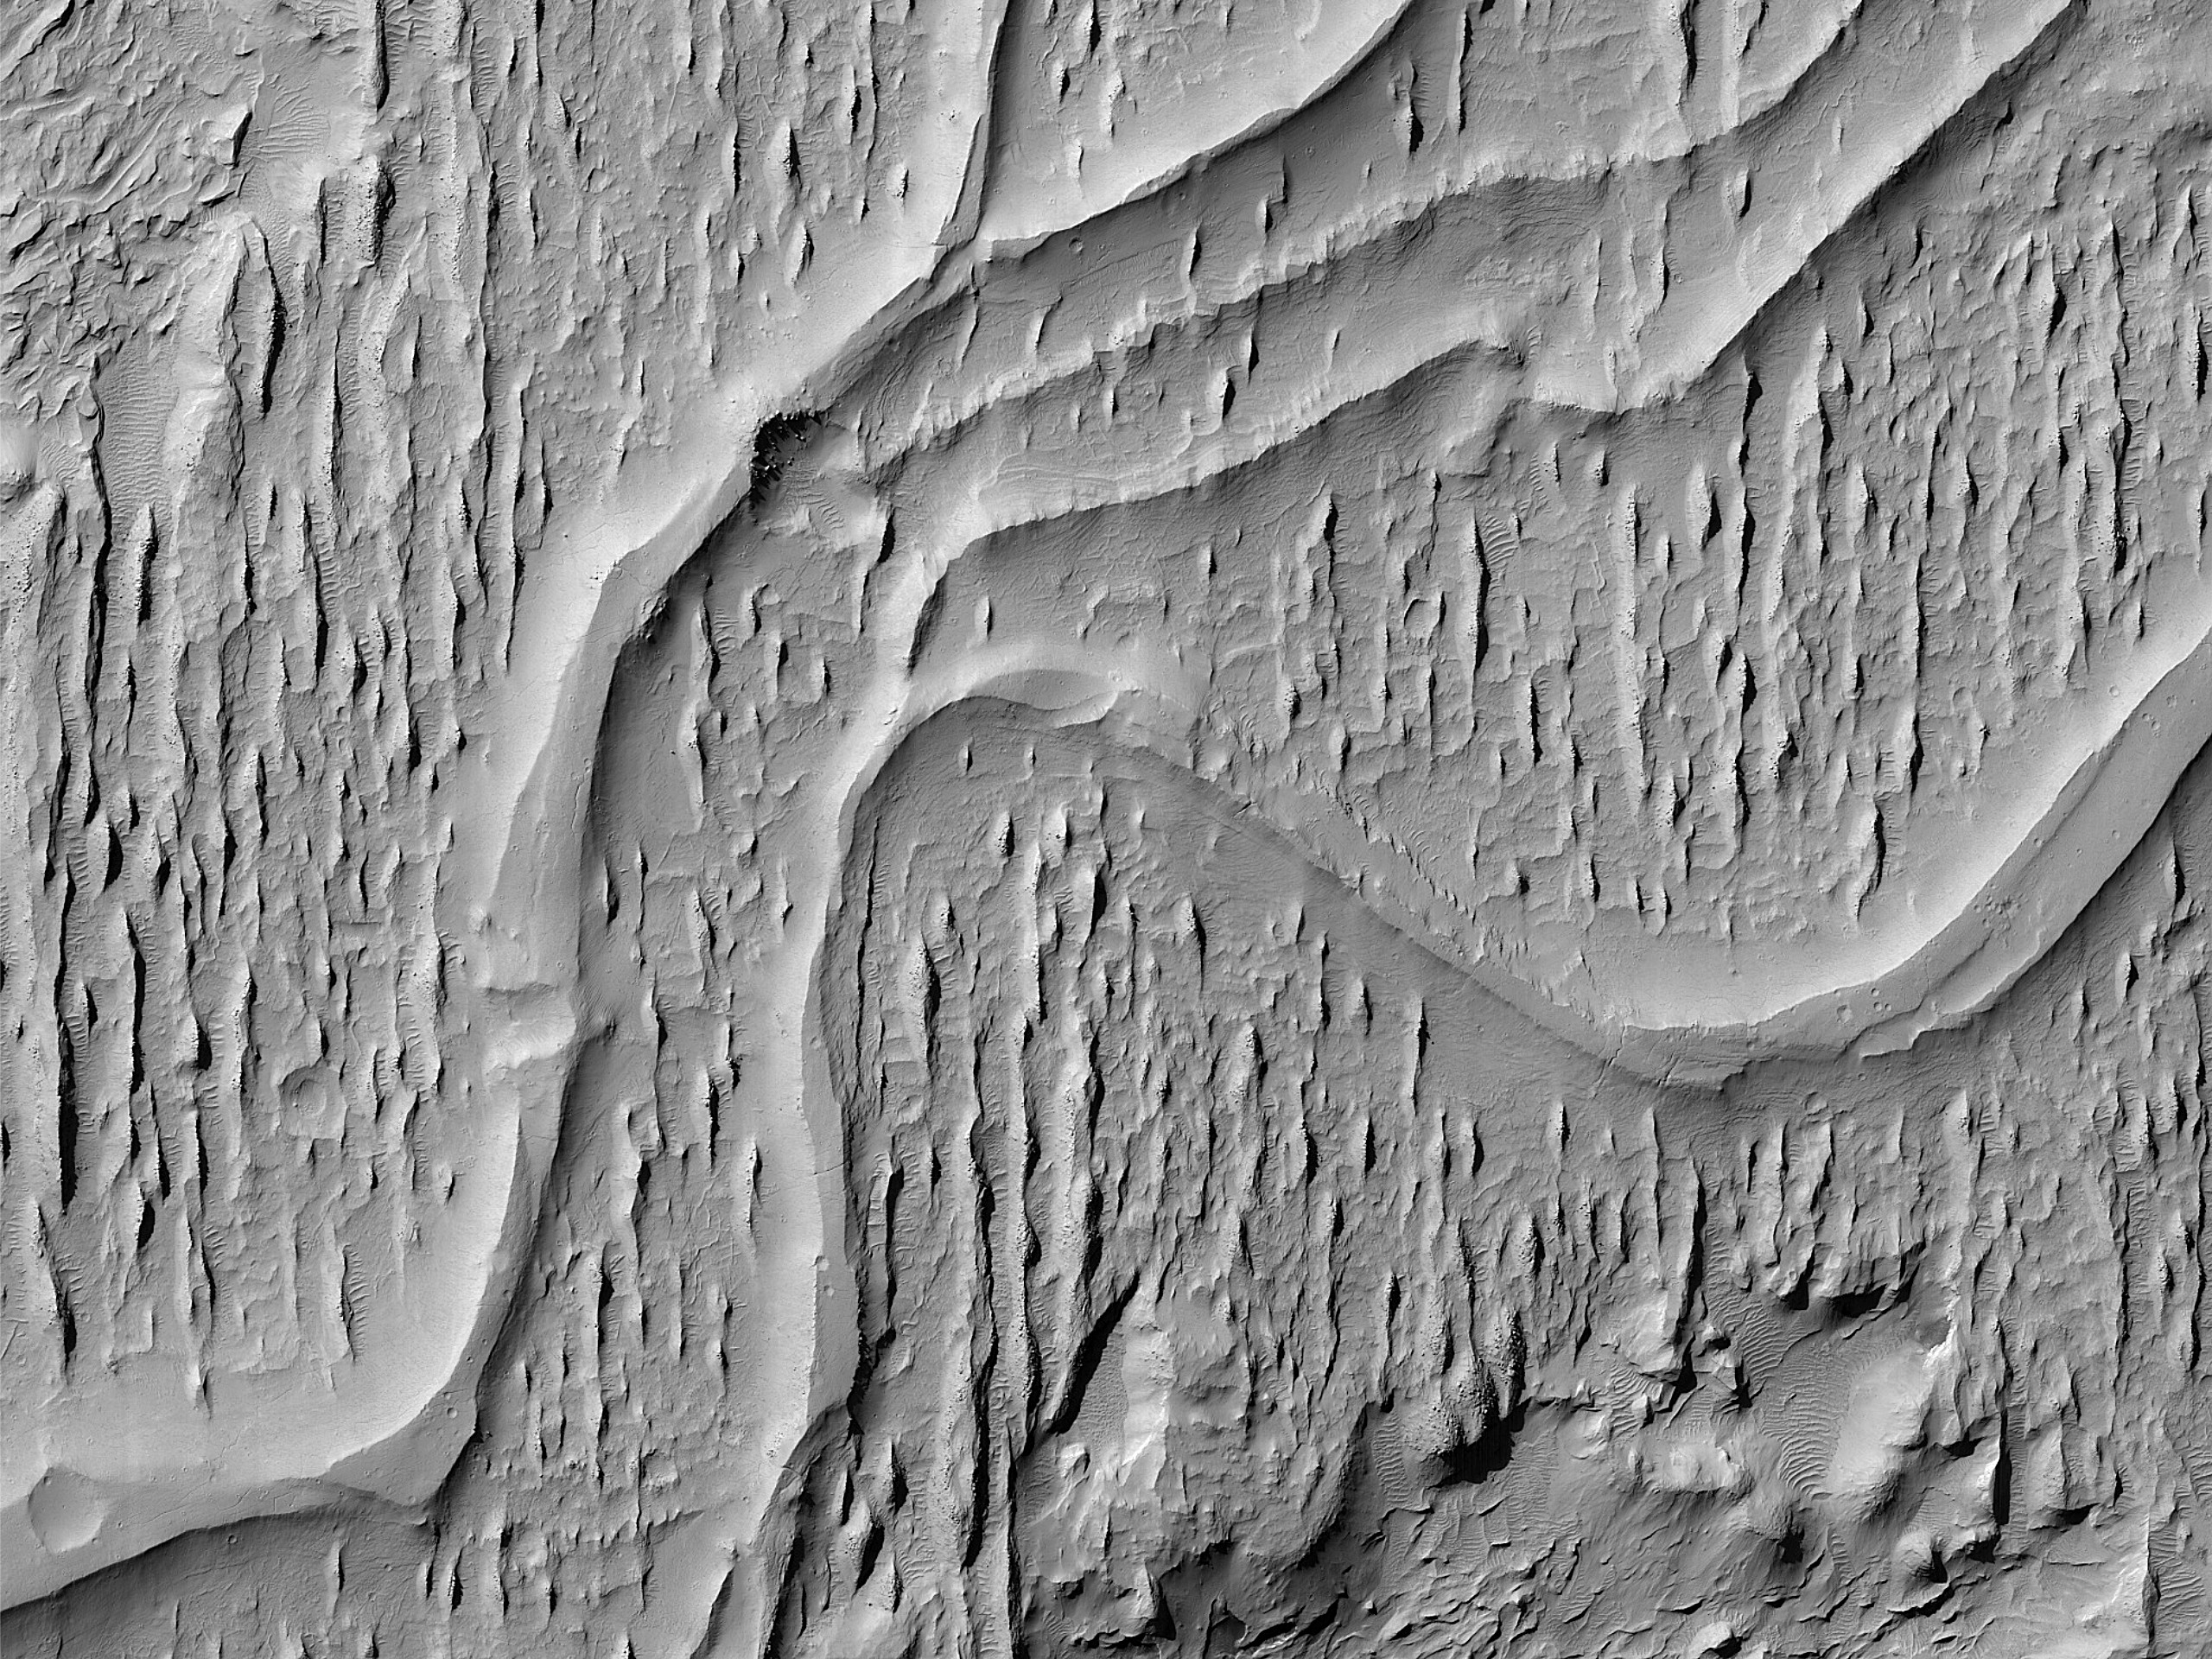 Flowing Rivers on Ancient Mars